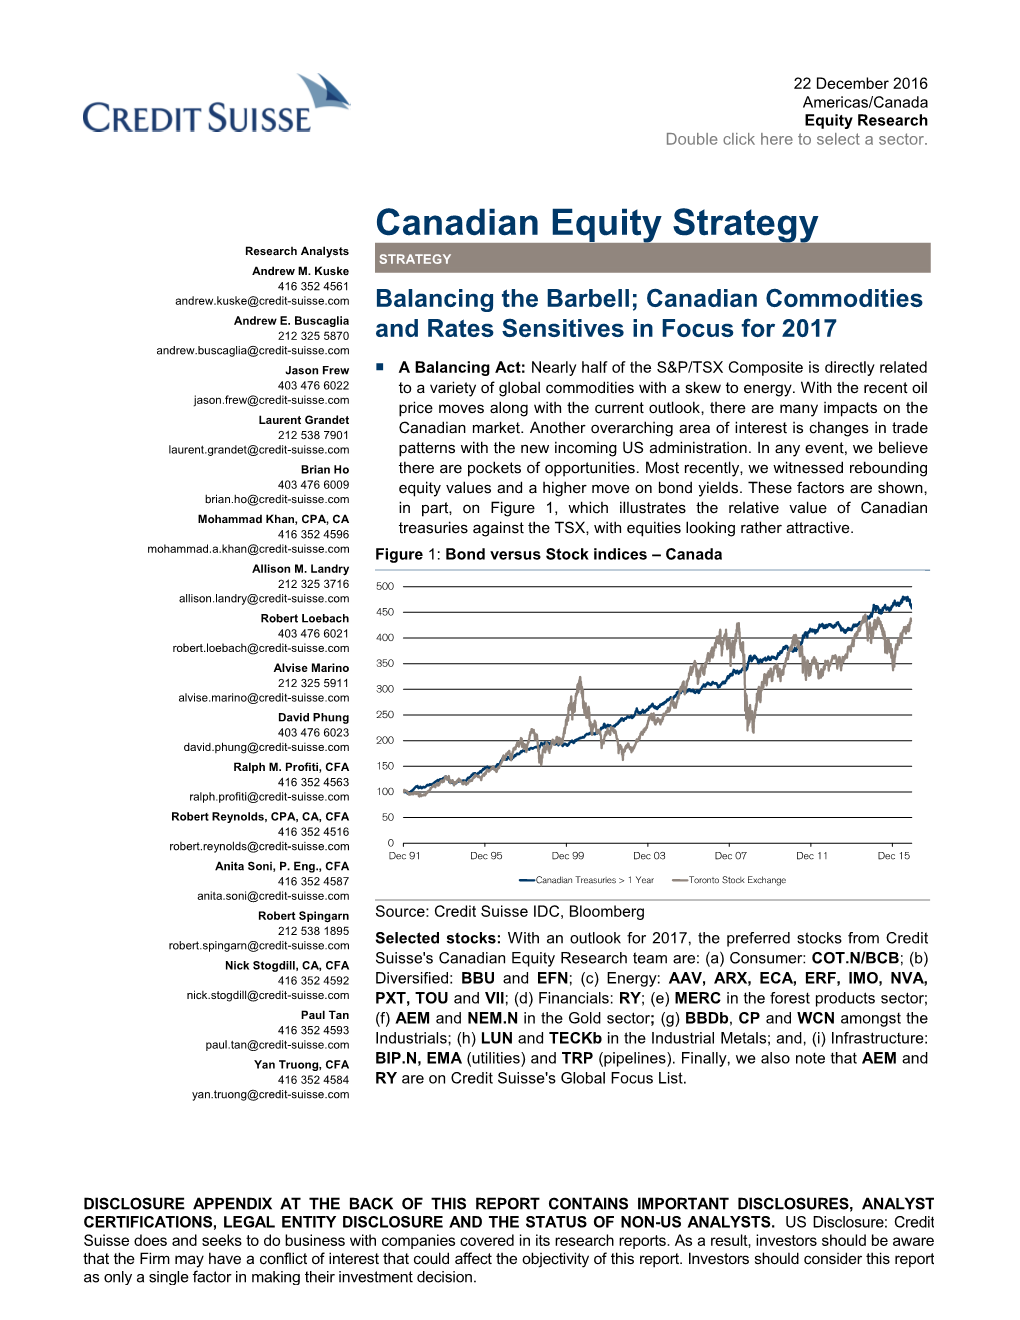 Canadian Equity Strategy Research Analysts STRATEGY Andrew M